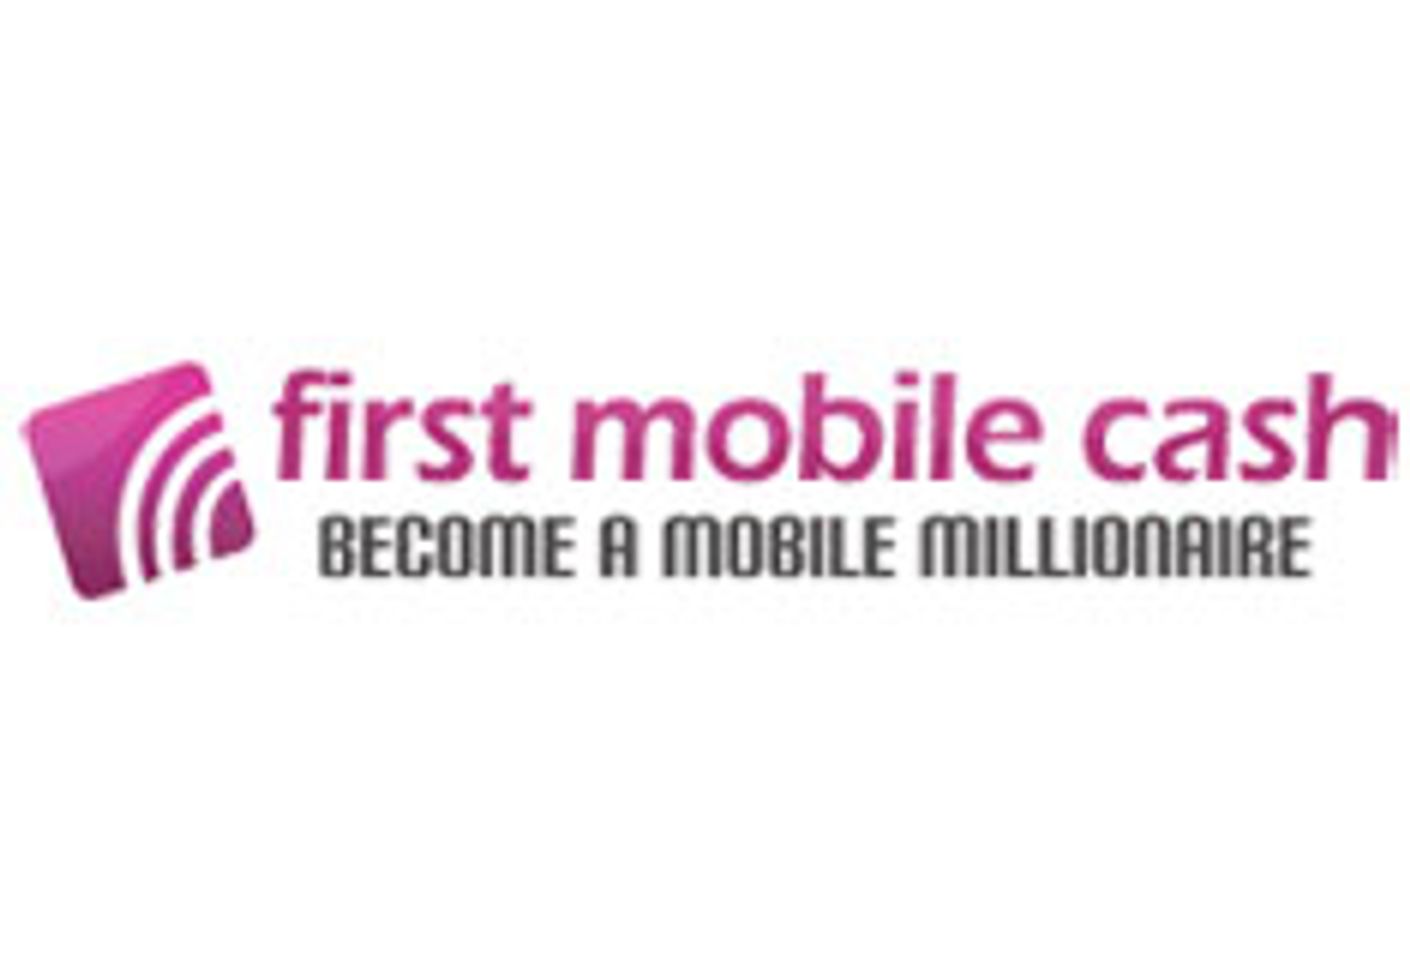 Andrea Nobili Productions and First Mobile Cash Launch Mobile Website